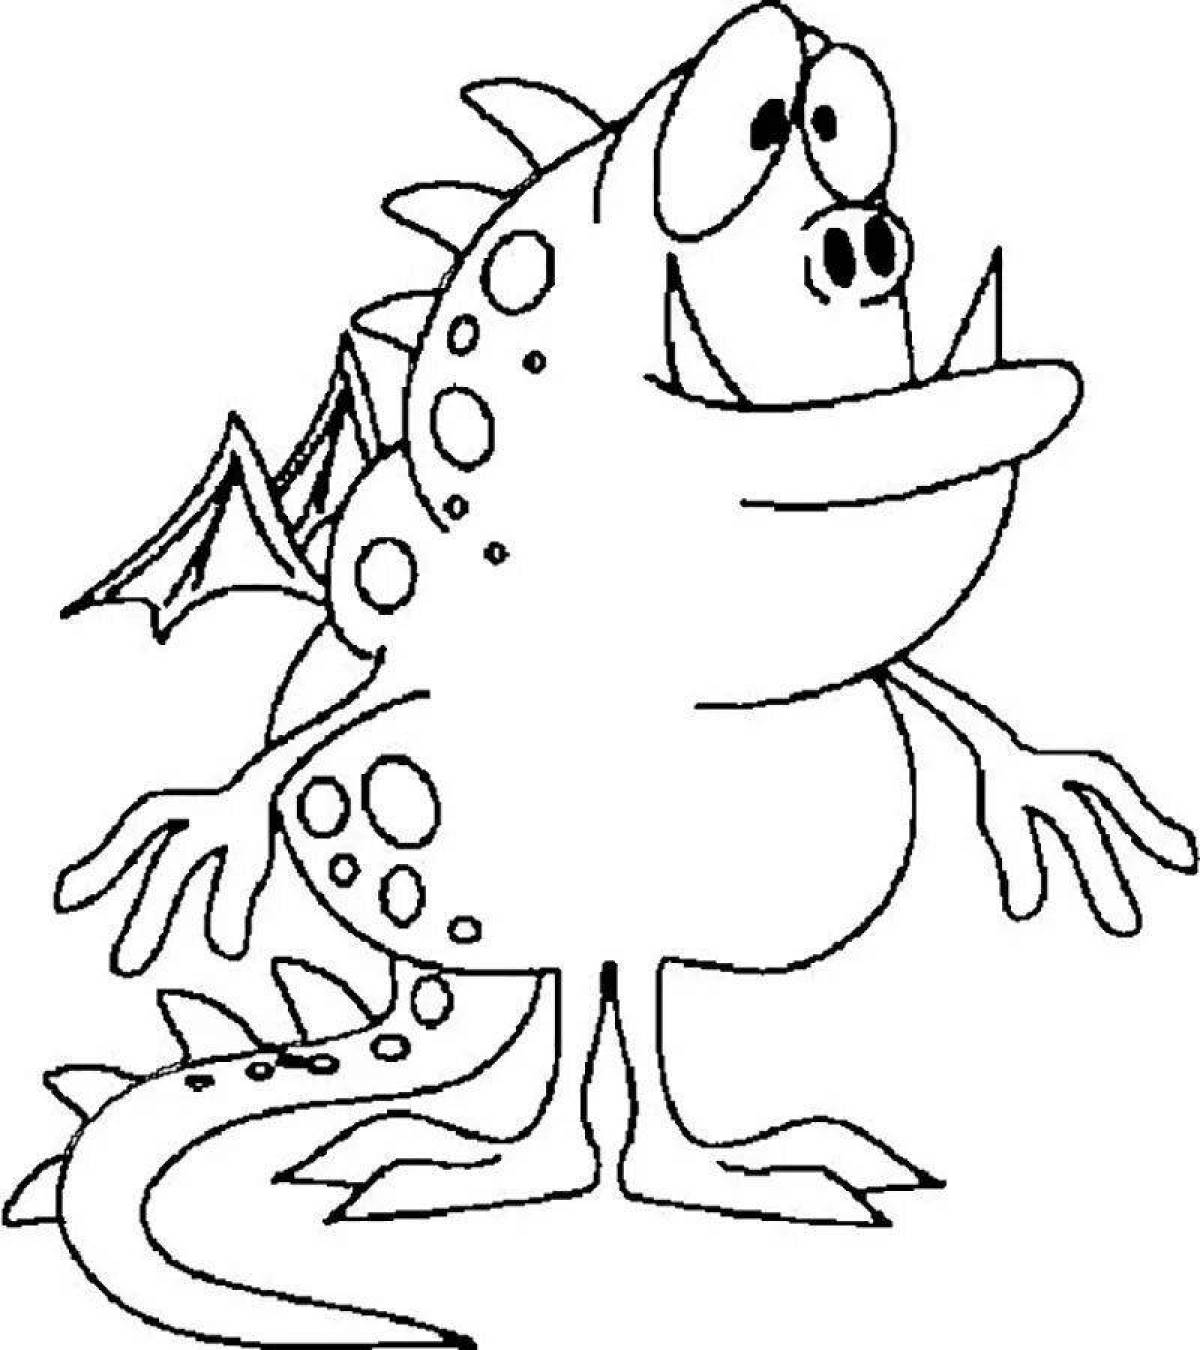 Exploding color monsters coloring pages for kids